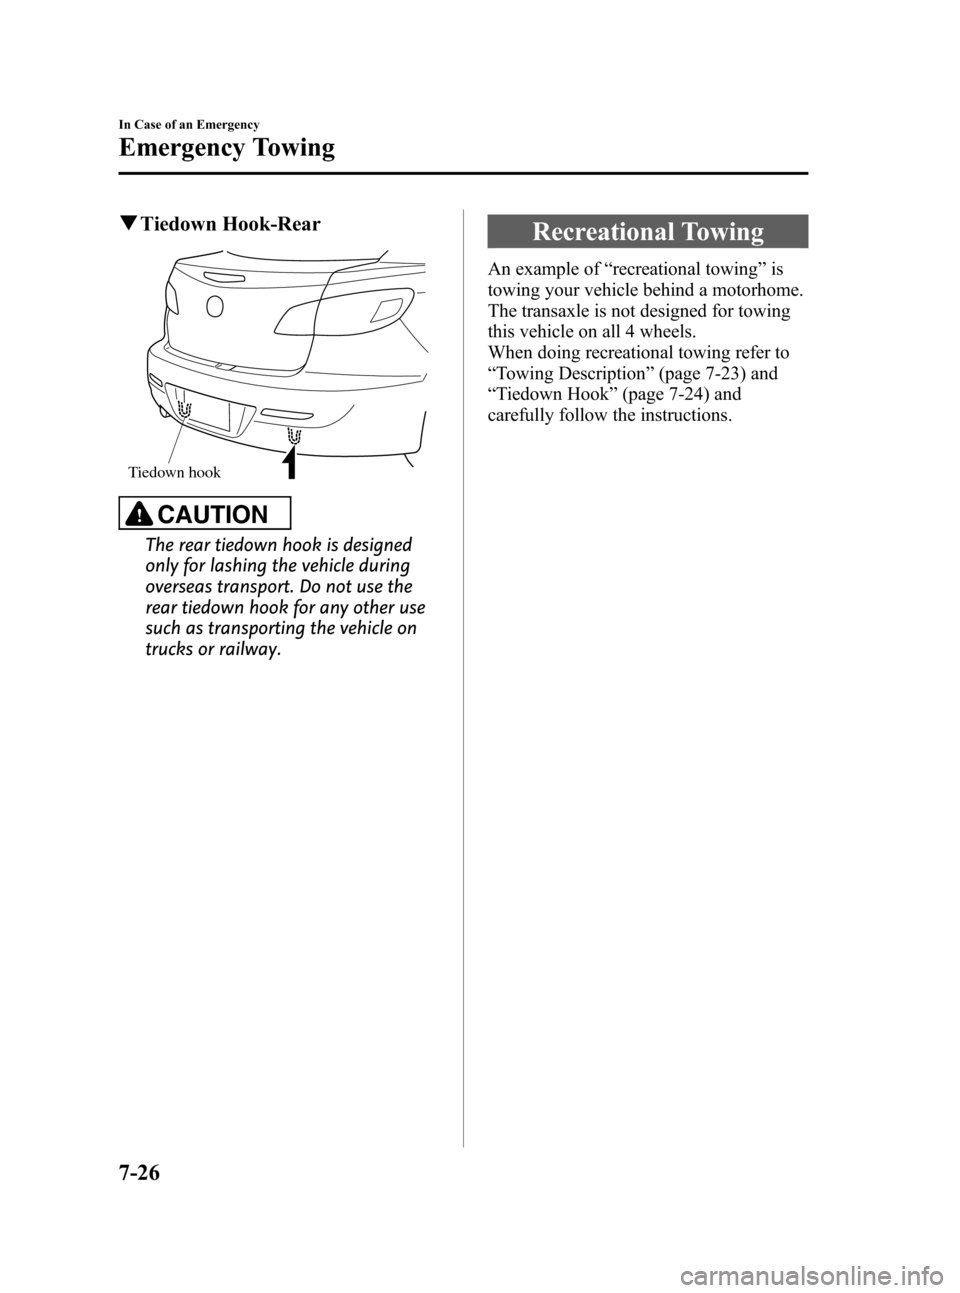 MAZDA MODEL 3 HATCHBACK 2011  Owners Manual (in English) Black plate (372,1)
qTiedown Hook-Rear
Tiedown hook
CAUTION
The rear tiedown hook is designed
only for lashing the vehicle during
overseas transport. Do not use the
rear tiedown hook for any other use